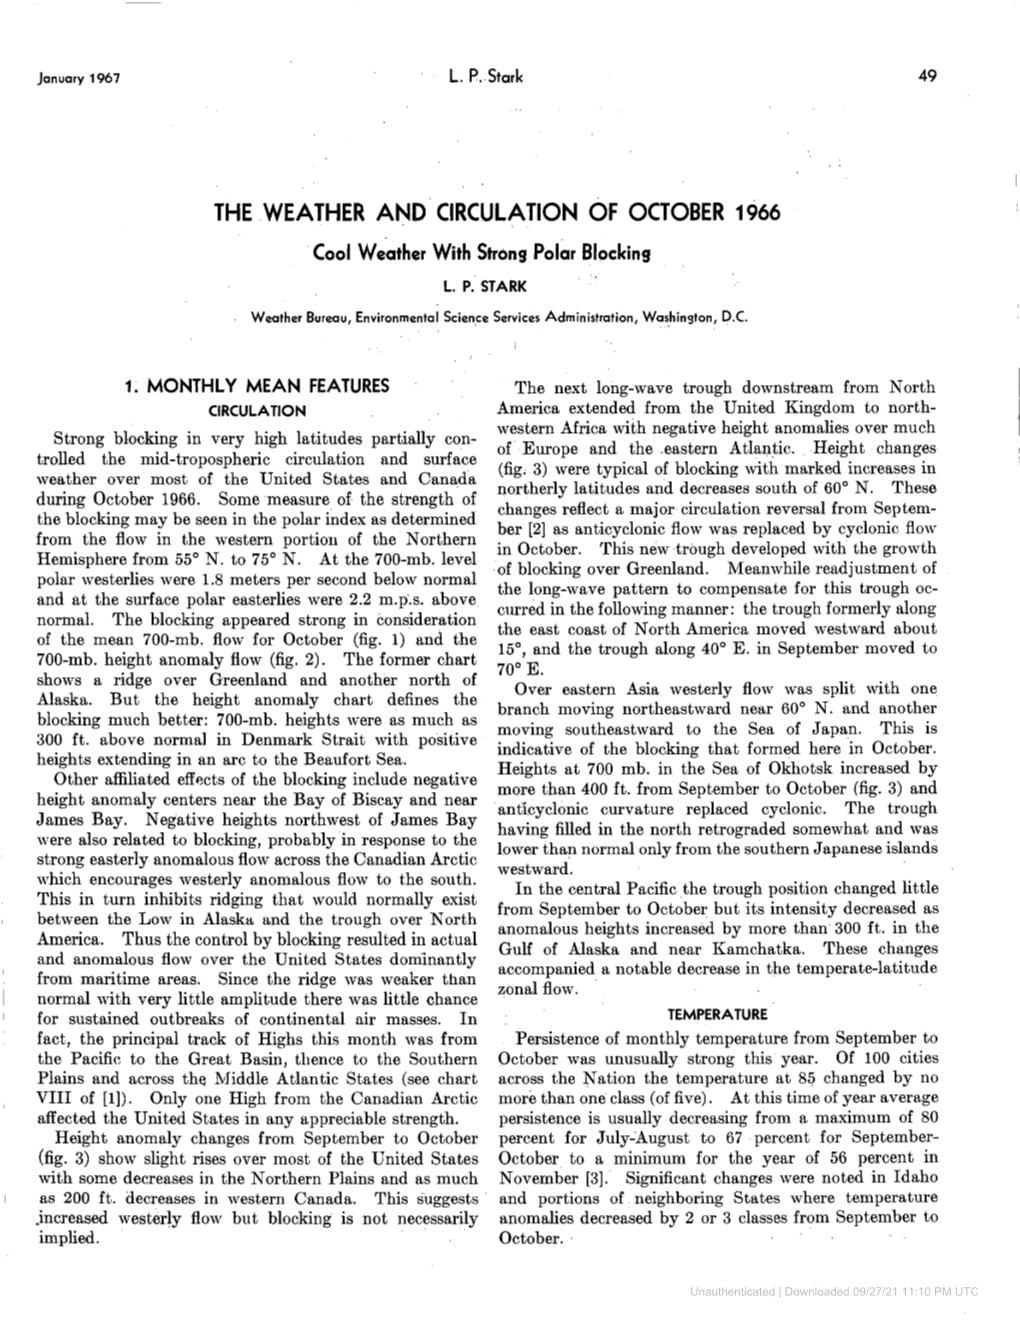 The Weather and Circulation of October 1966